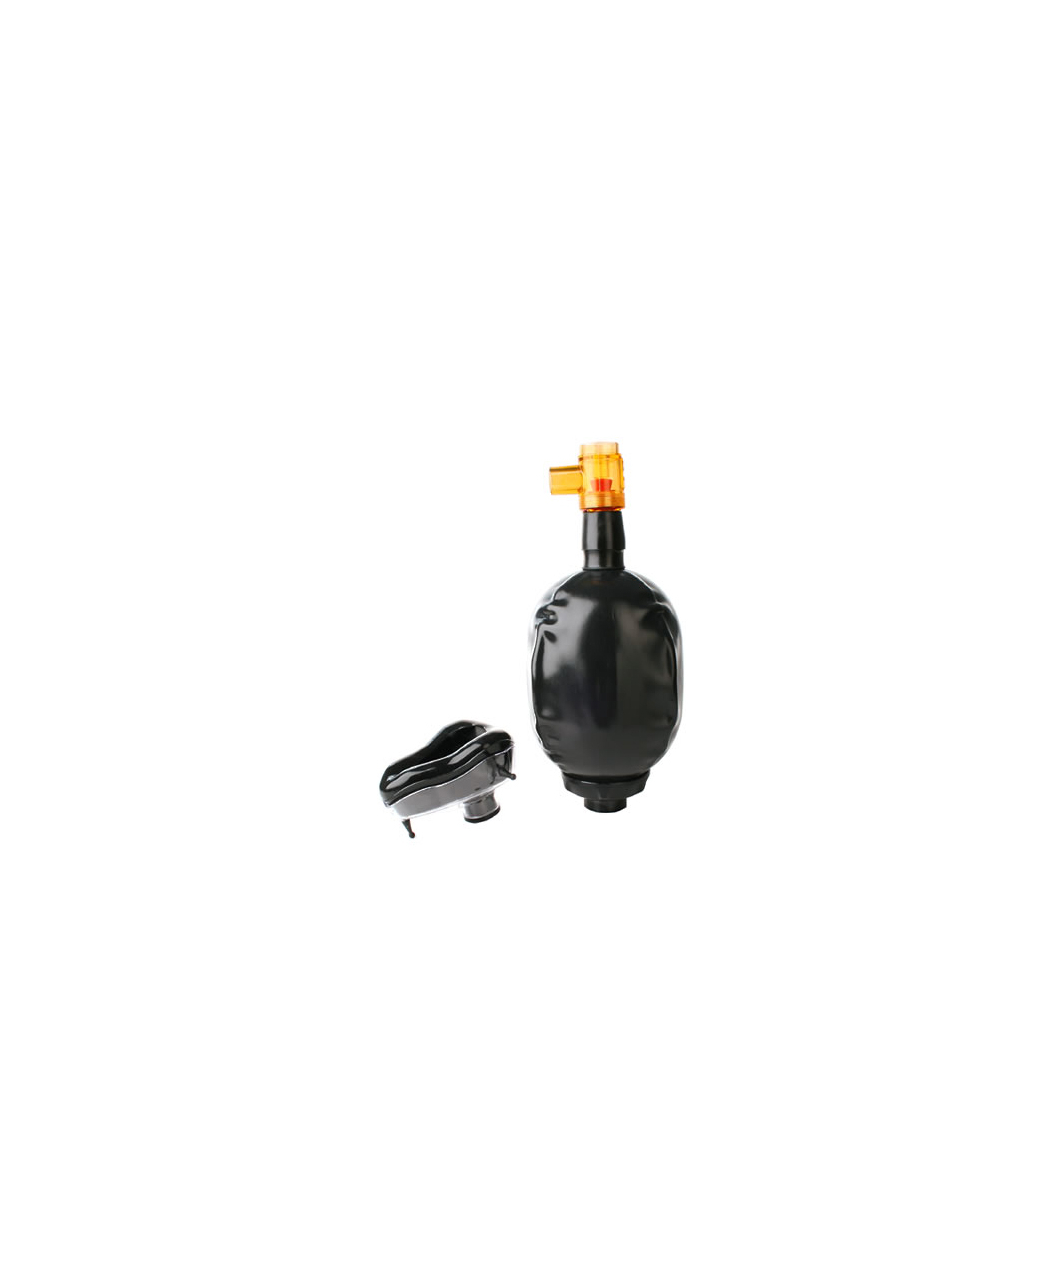 Blackstyle Resuscitator with an attachable re-breathing bag